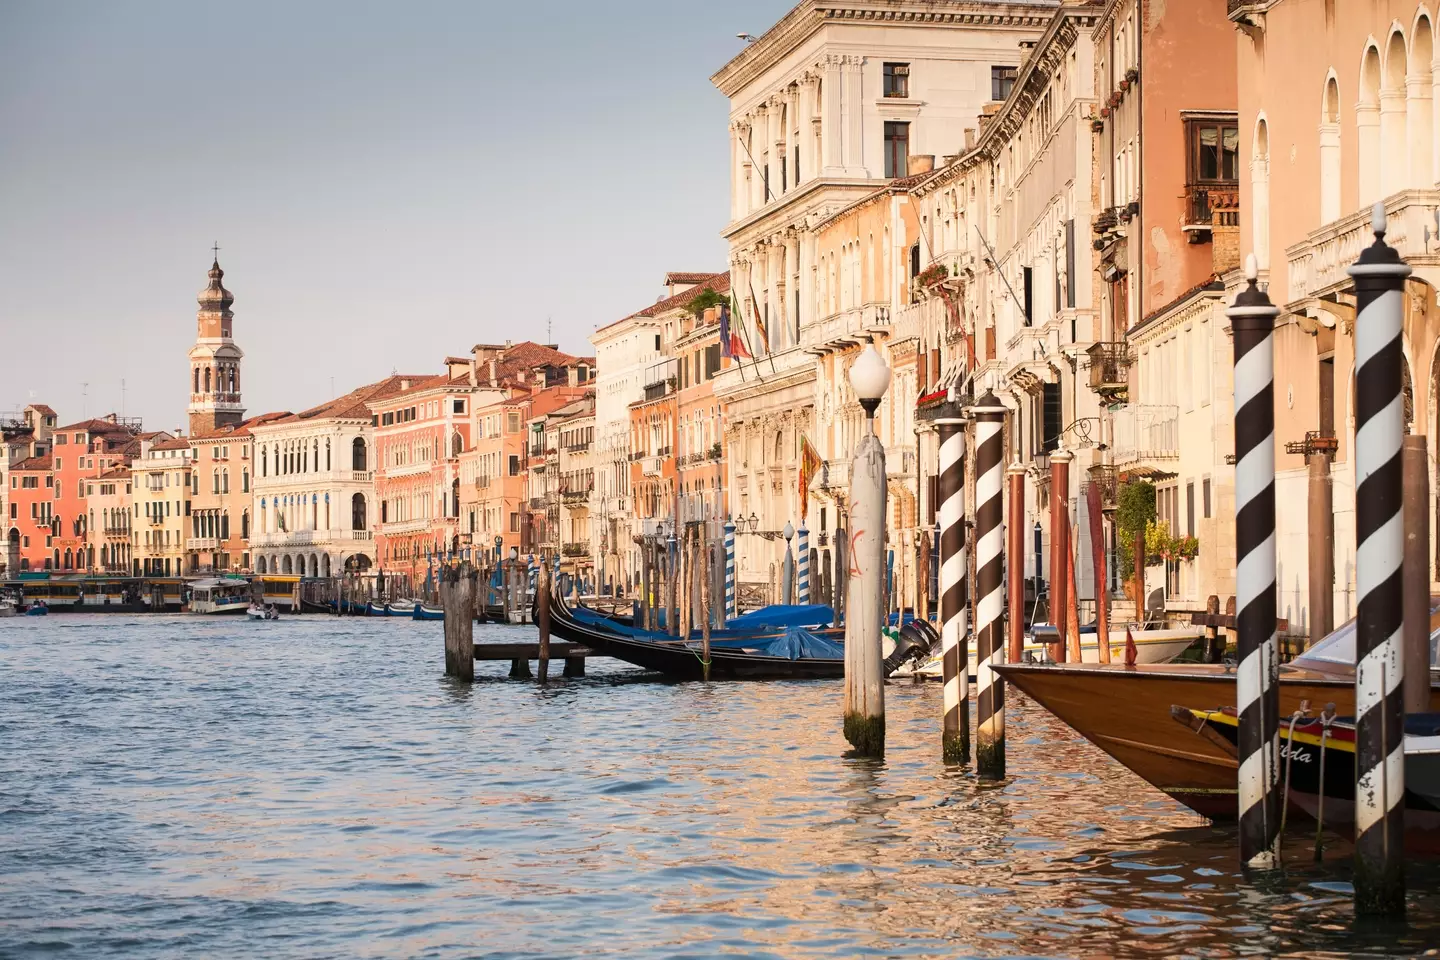 The Grand Canal in Venice.